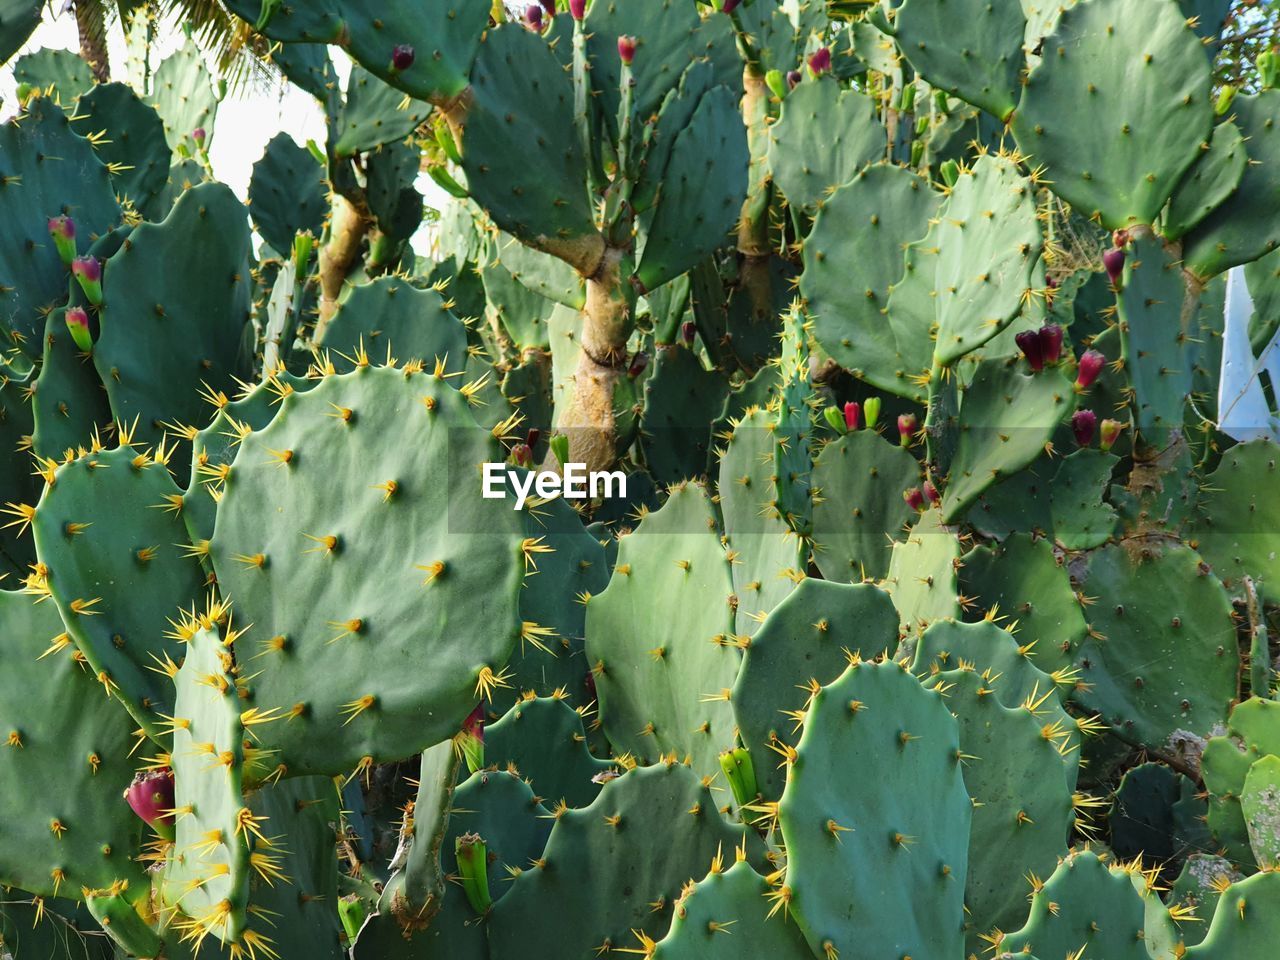 CLOSE-UP OF CACTUS GROWING ON TREE